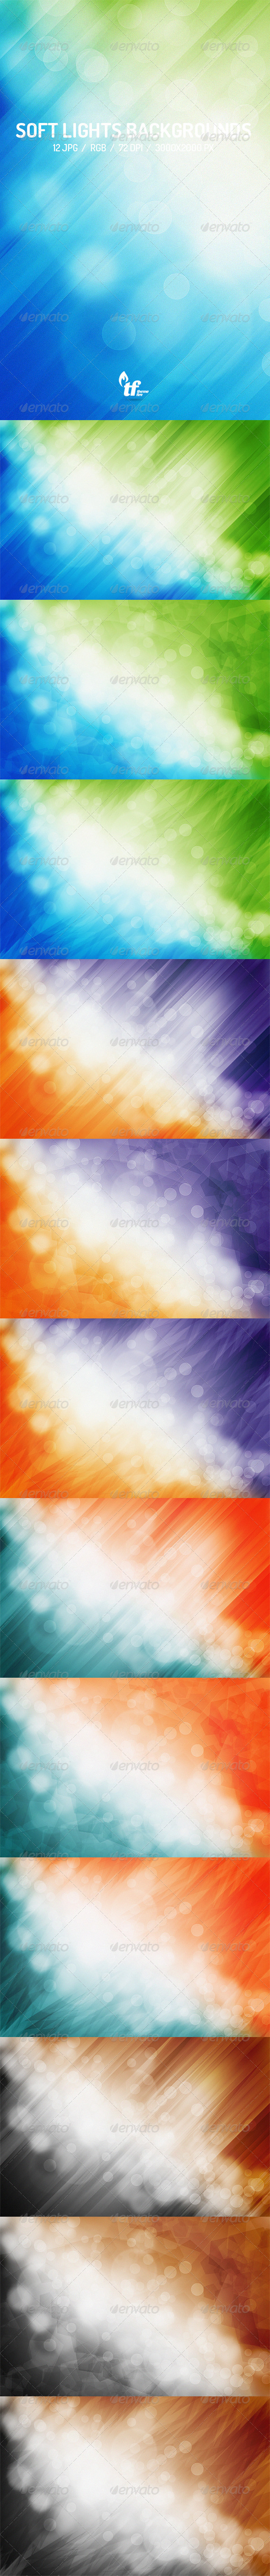 GraphicRiver Soft Lights Abstract Backgrounds 7715186